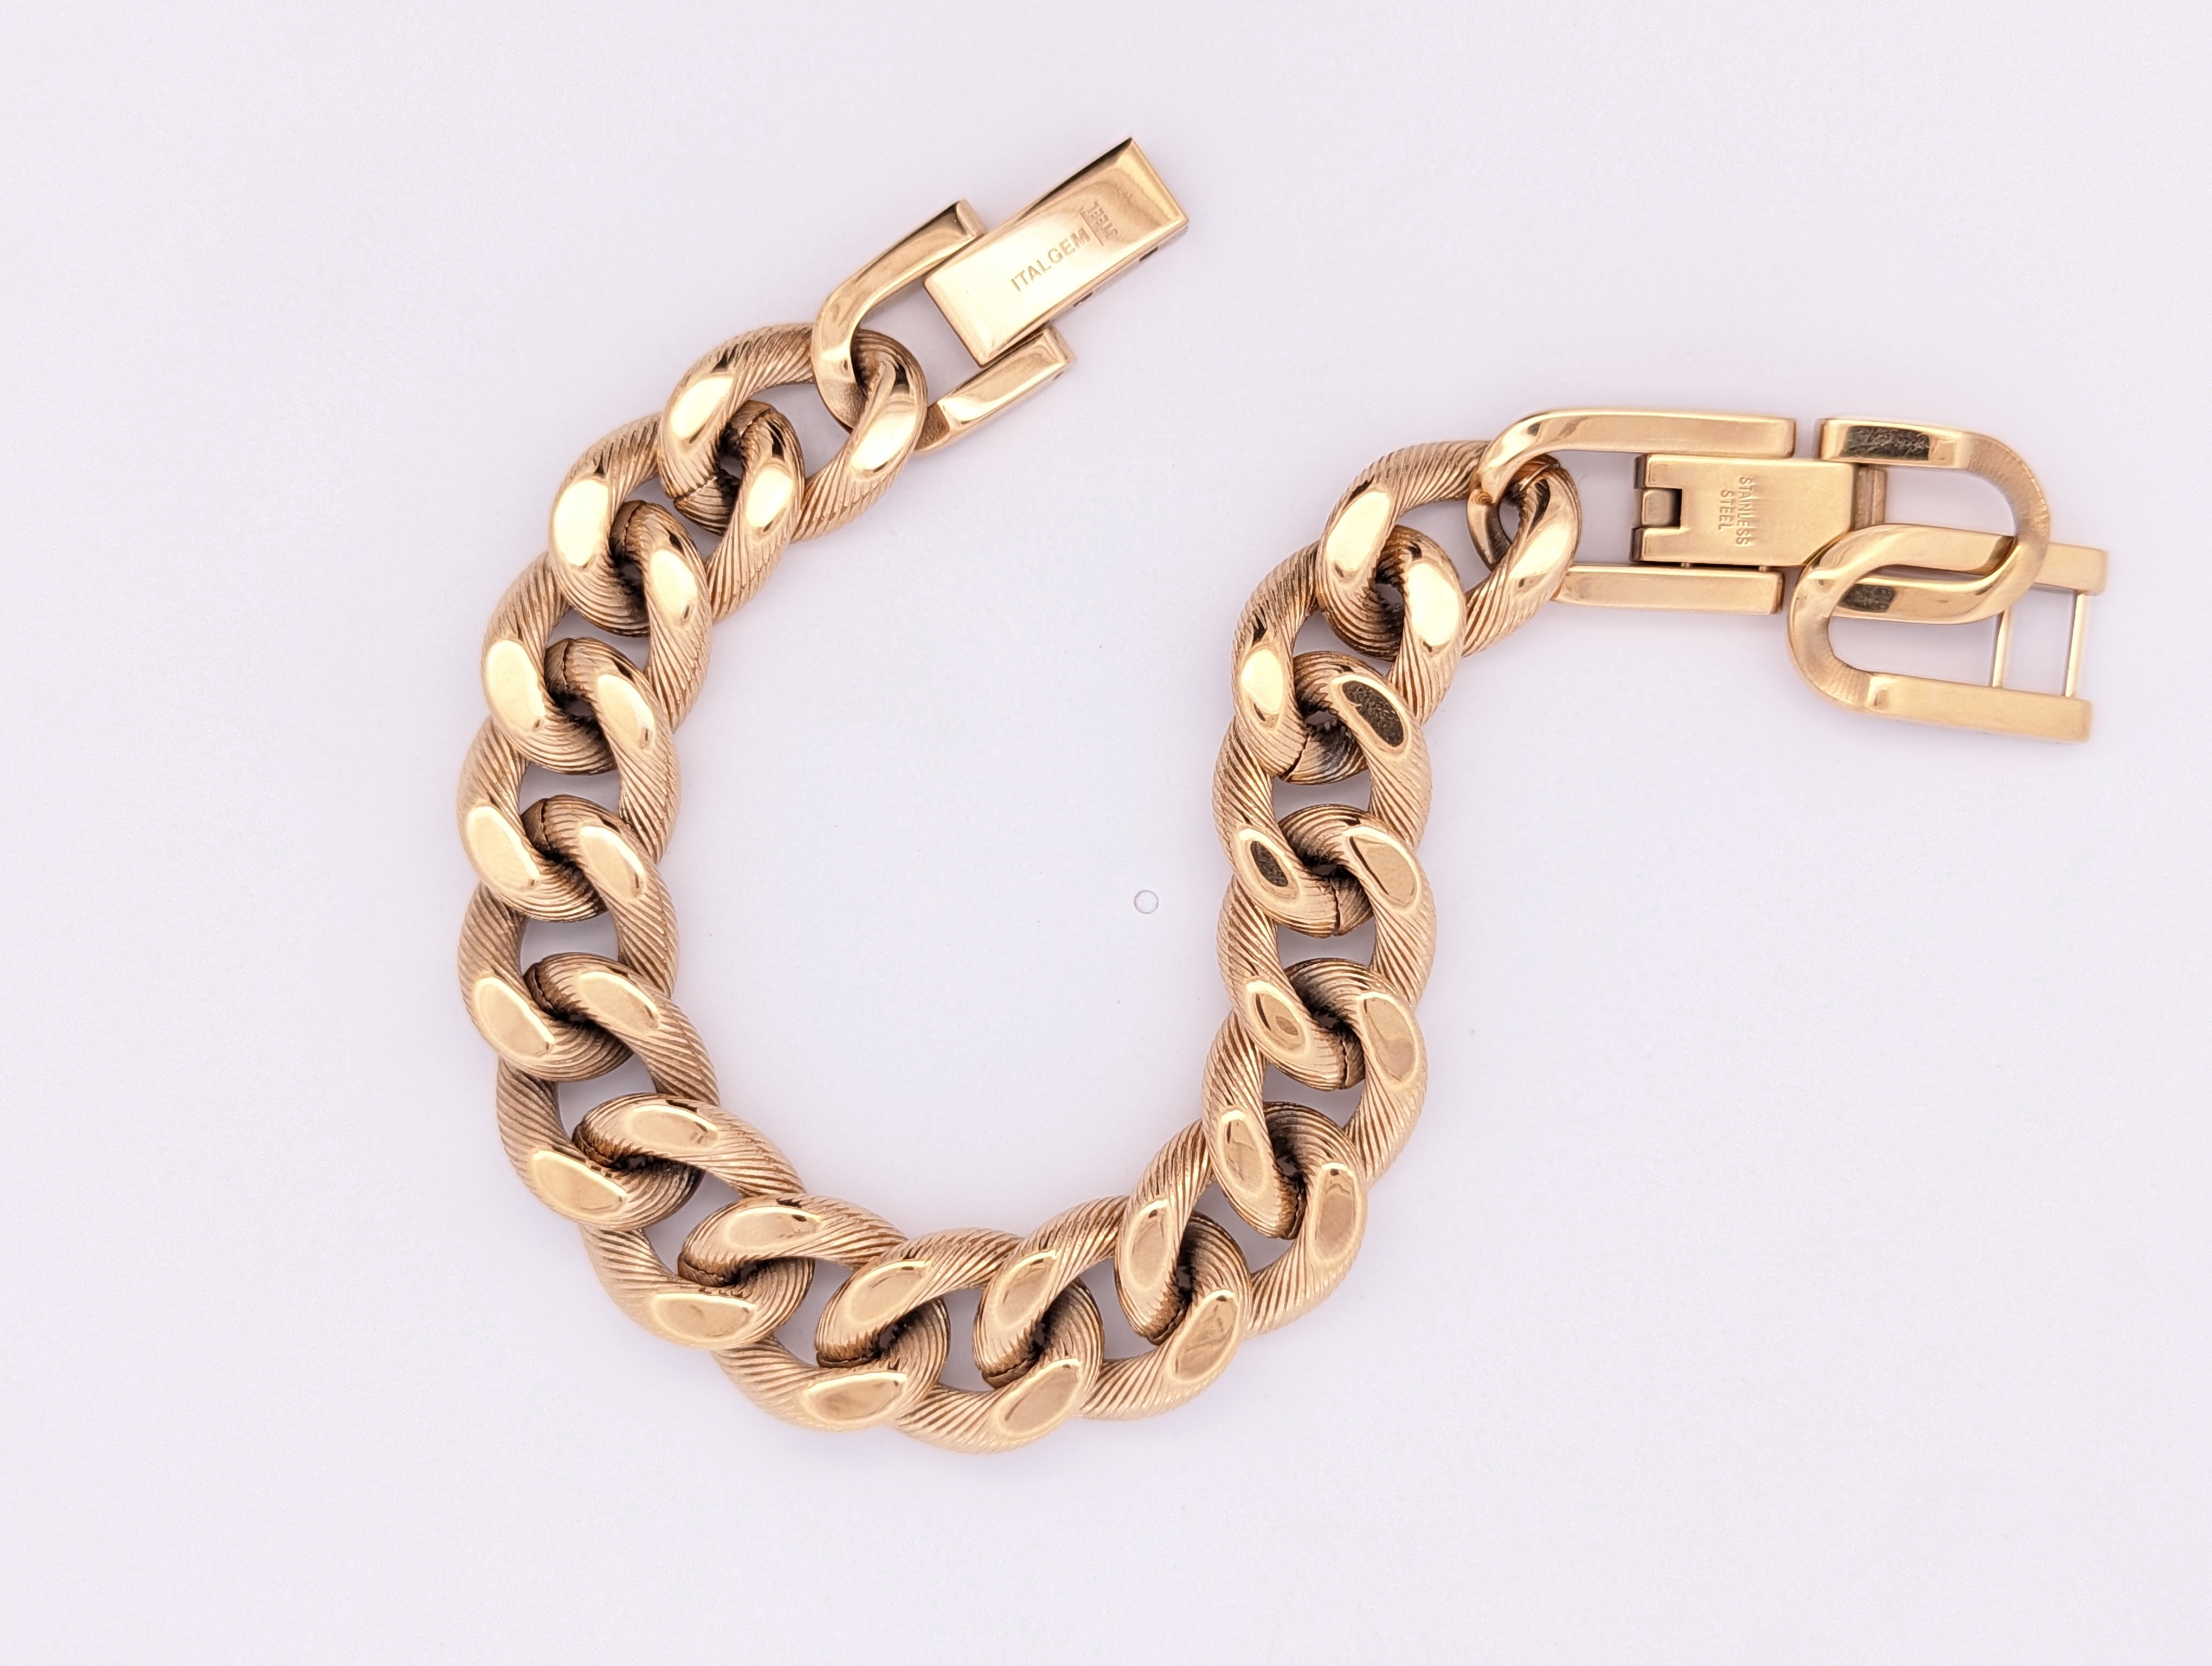 Amazing Tips for Choosing the Right Bracelet to Complement Your Style || Sleek Gold bracelet ||